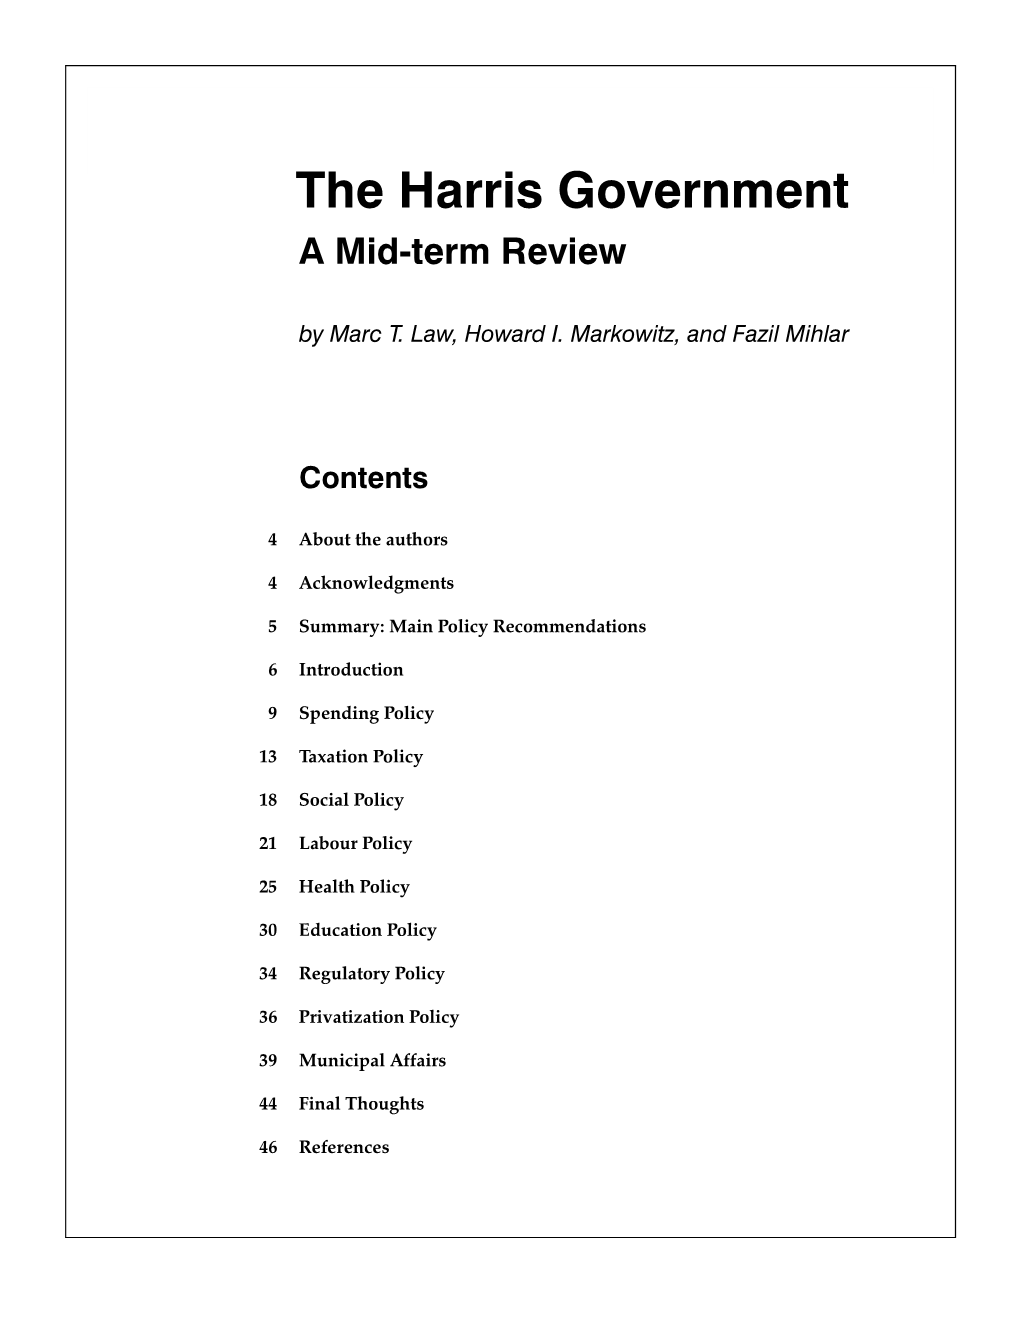 The Harris Government a Mid-Term Review